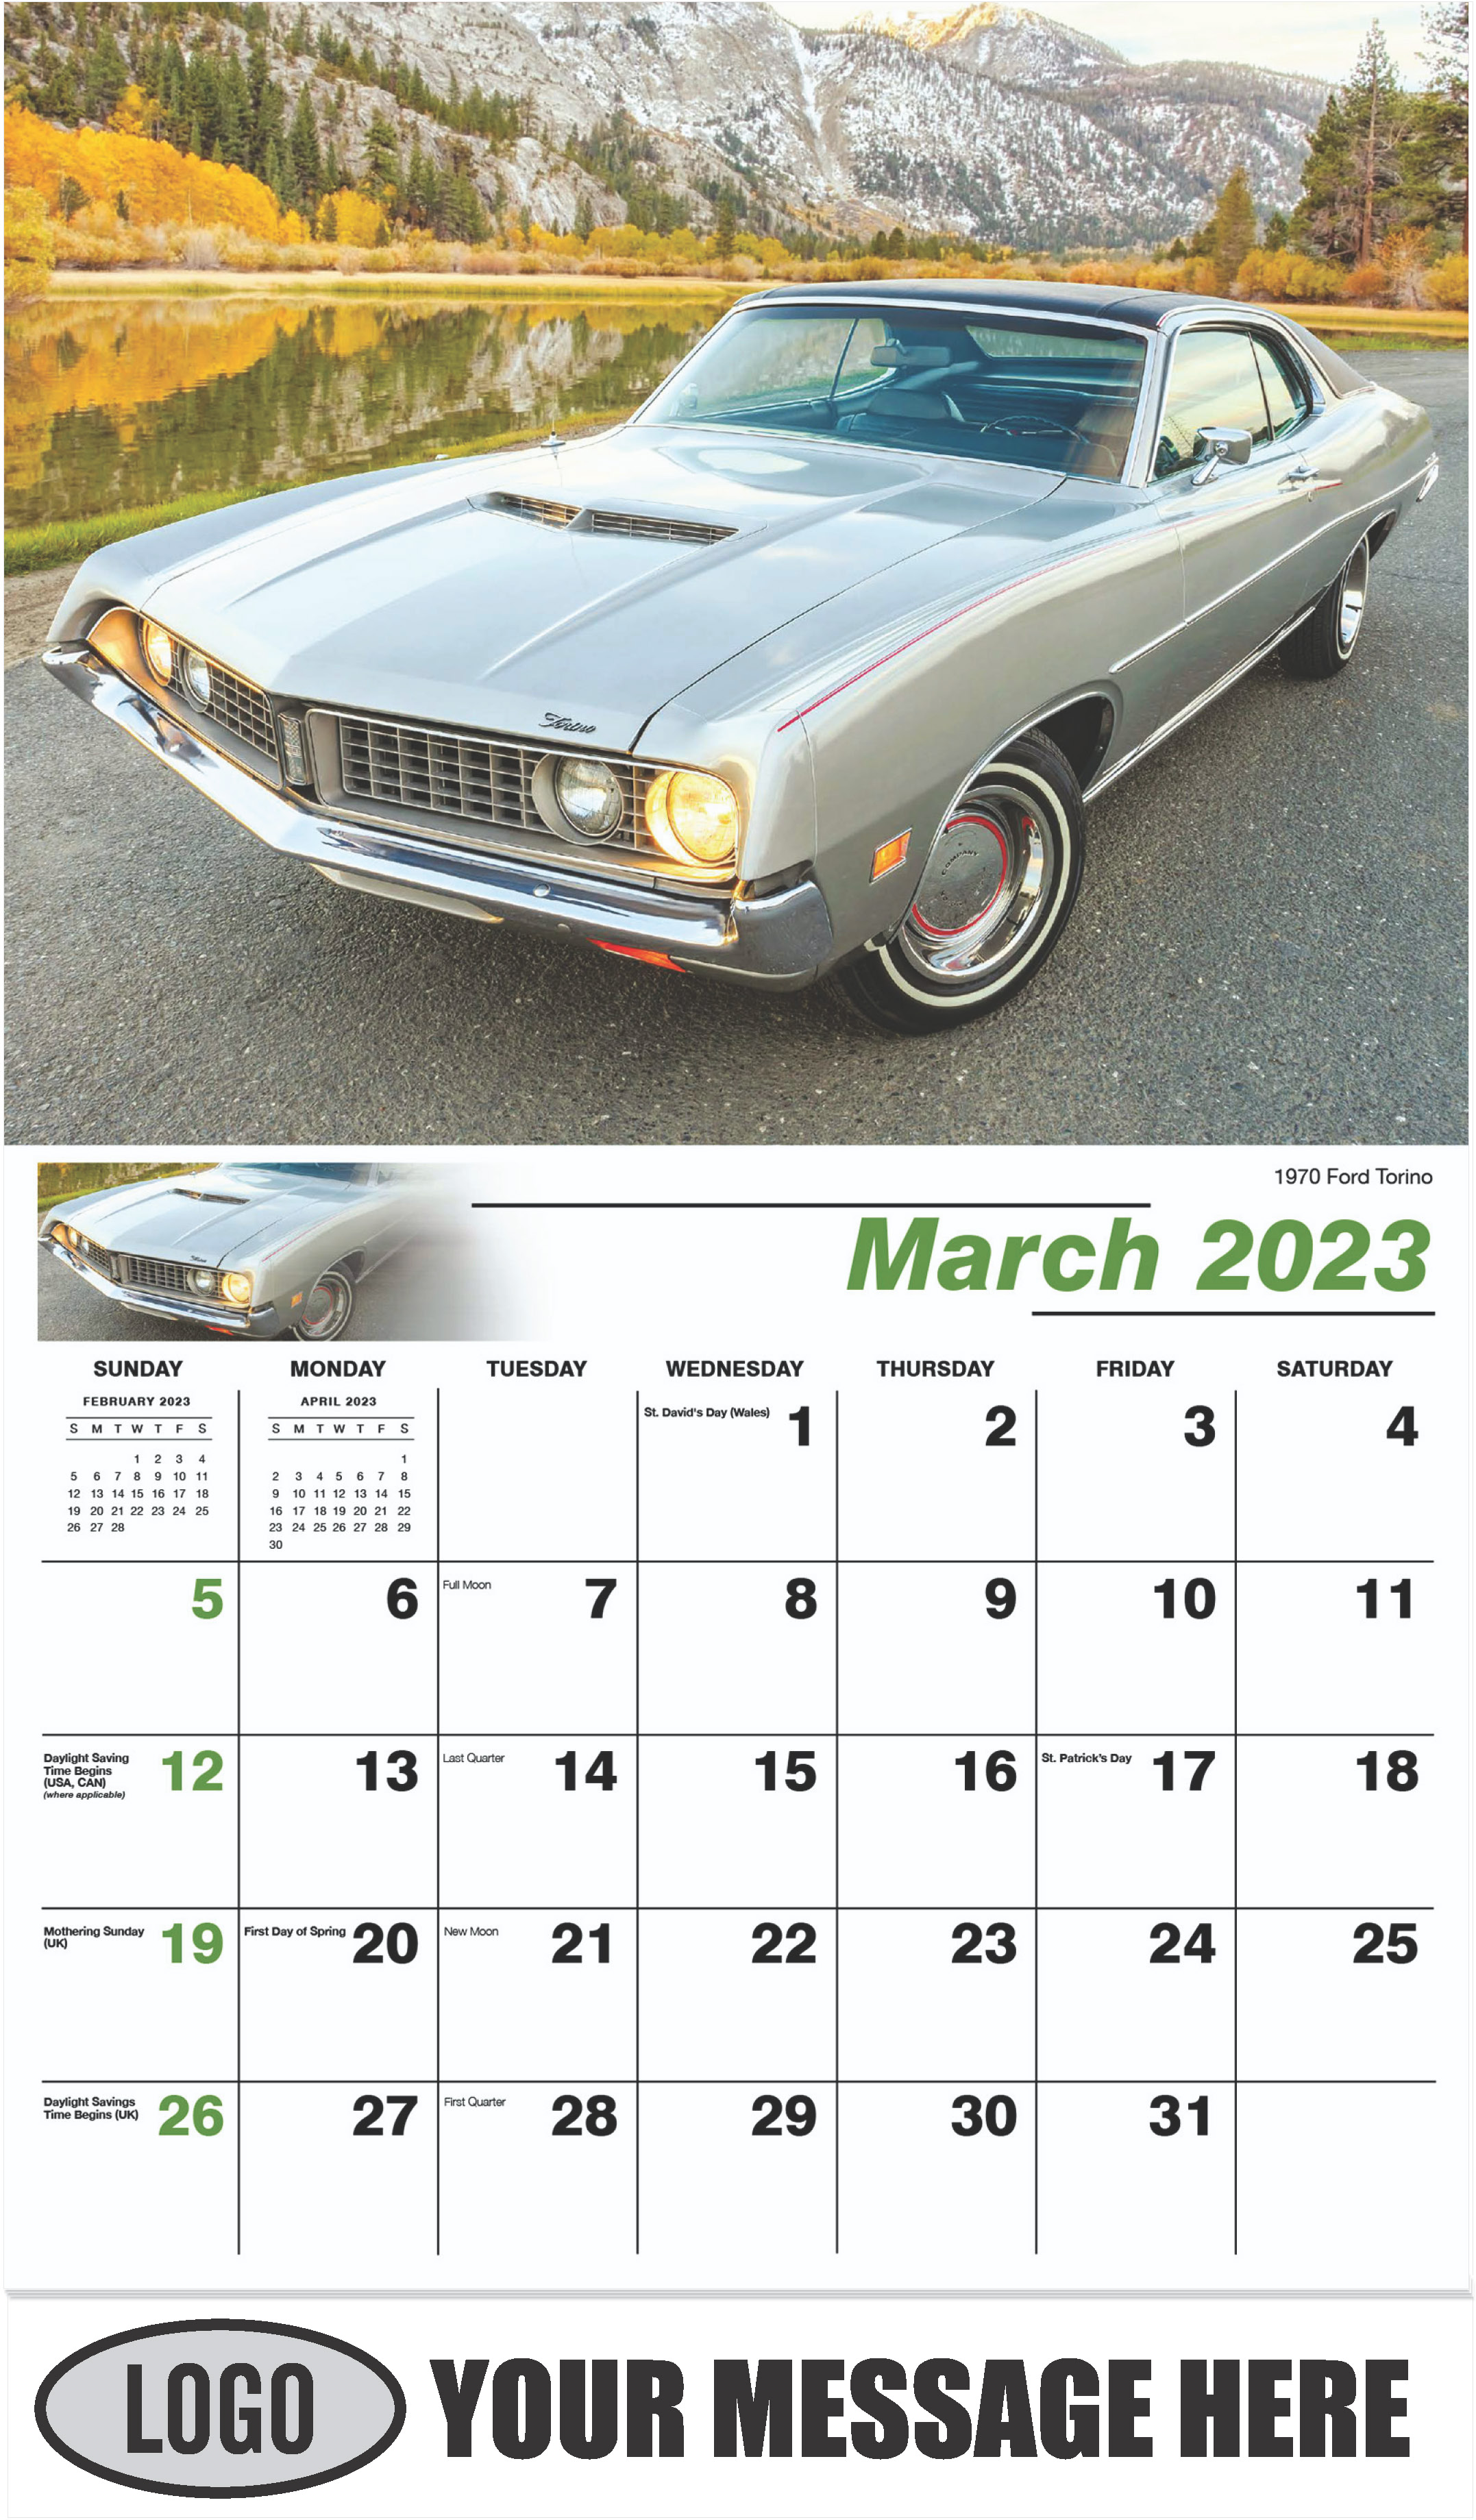 1970 Ford Torino - March - Henry's Heritage Ford Cars 2023 Promotional Calendar